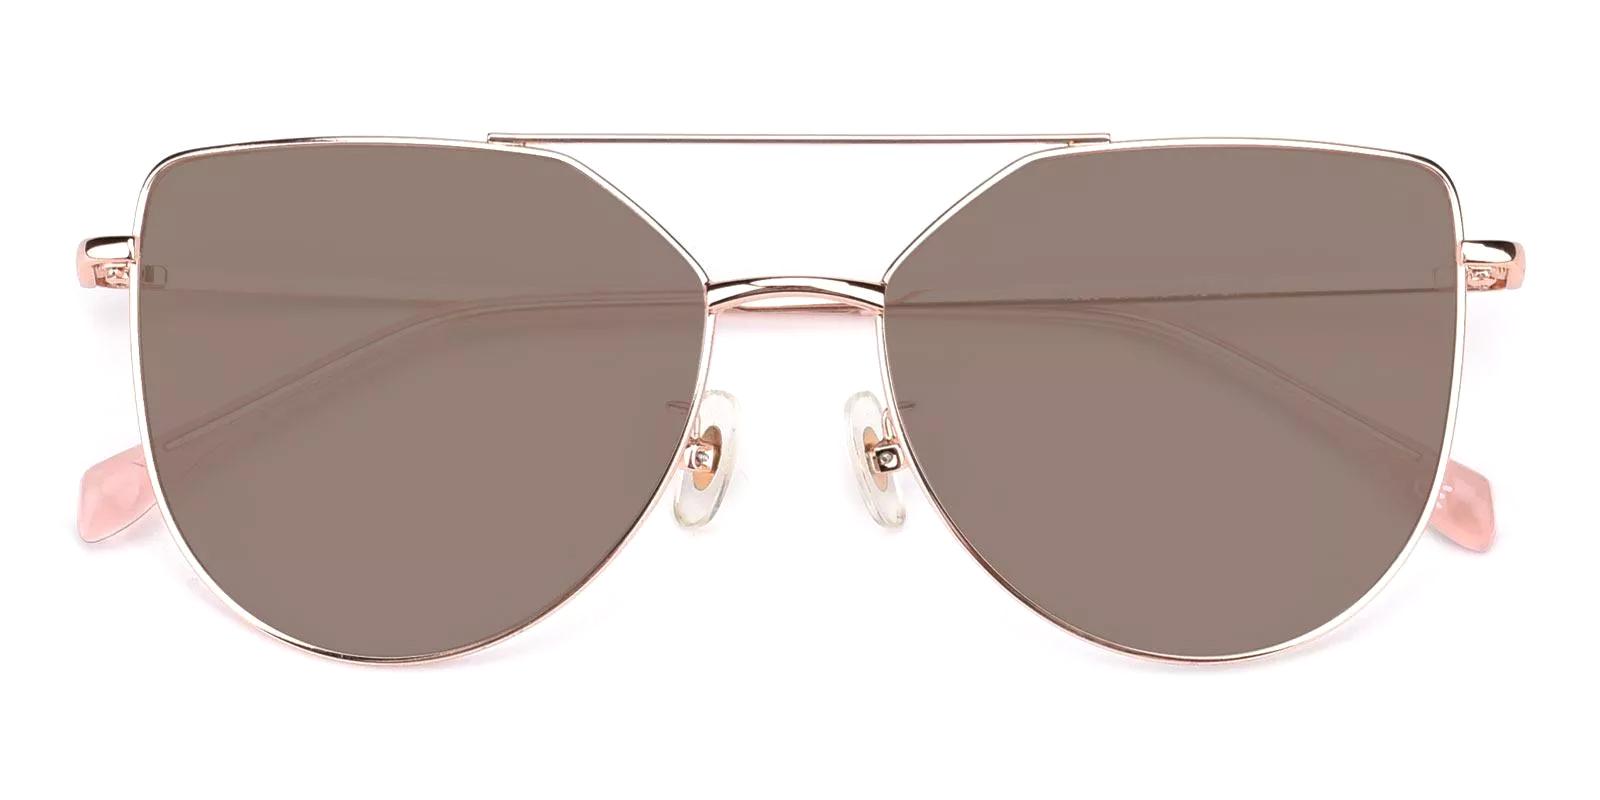 Shotier Rosegold Metal NosePads , Sunglasses Frames from ABBE Glasses